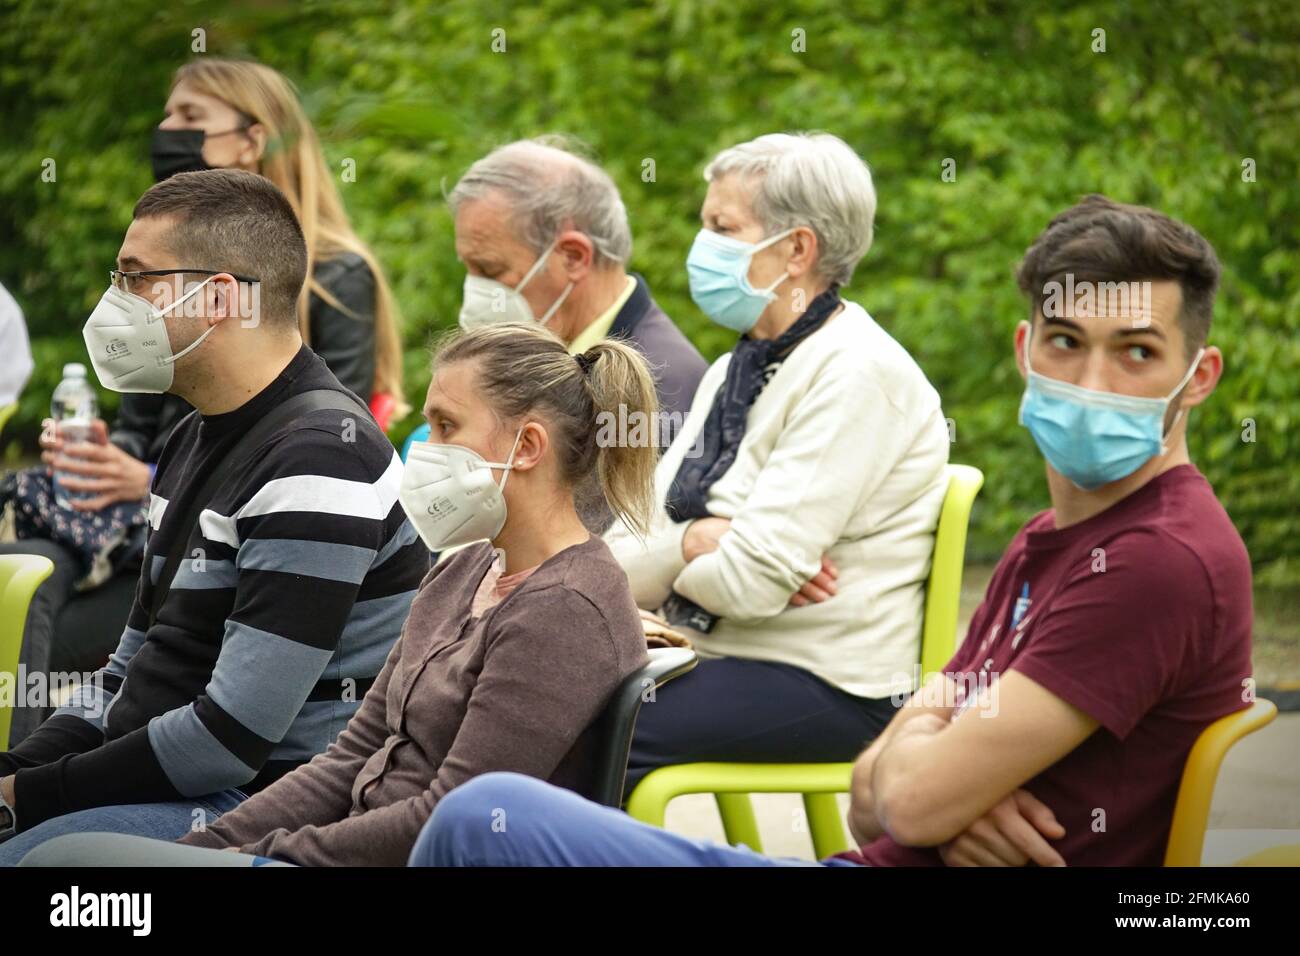 Audience wearing covid masks at first play in an outdoor park for post-pandemic reopening. Milan, Italy - May 2021 Stock Photo